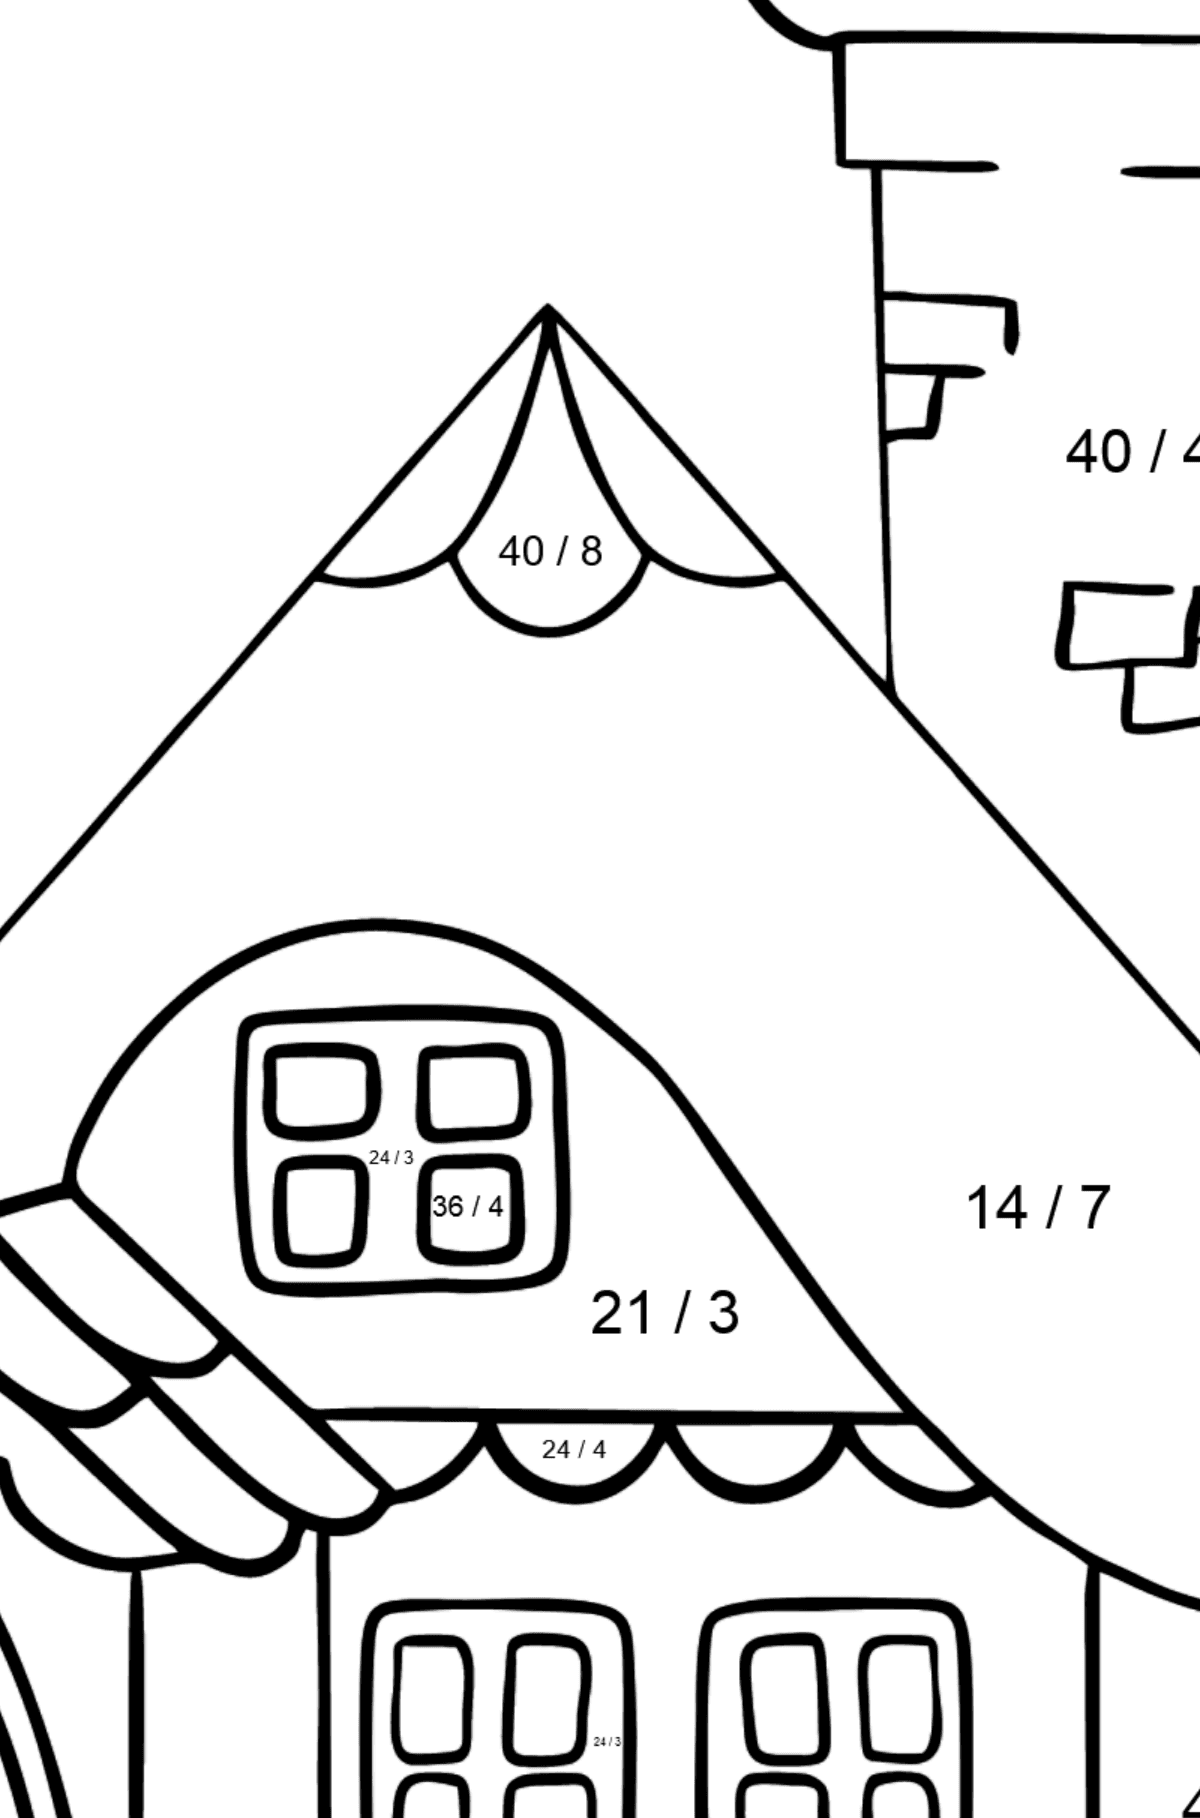 Coloring Page - A Wonderful House - Math Coloring - Division for Kids